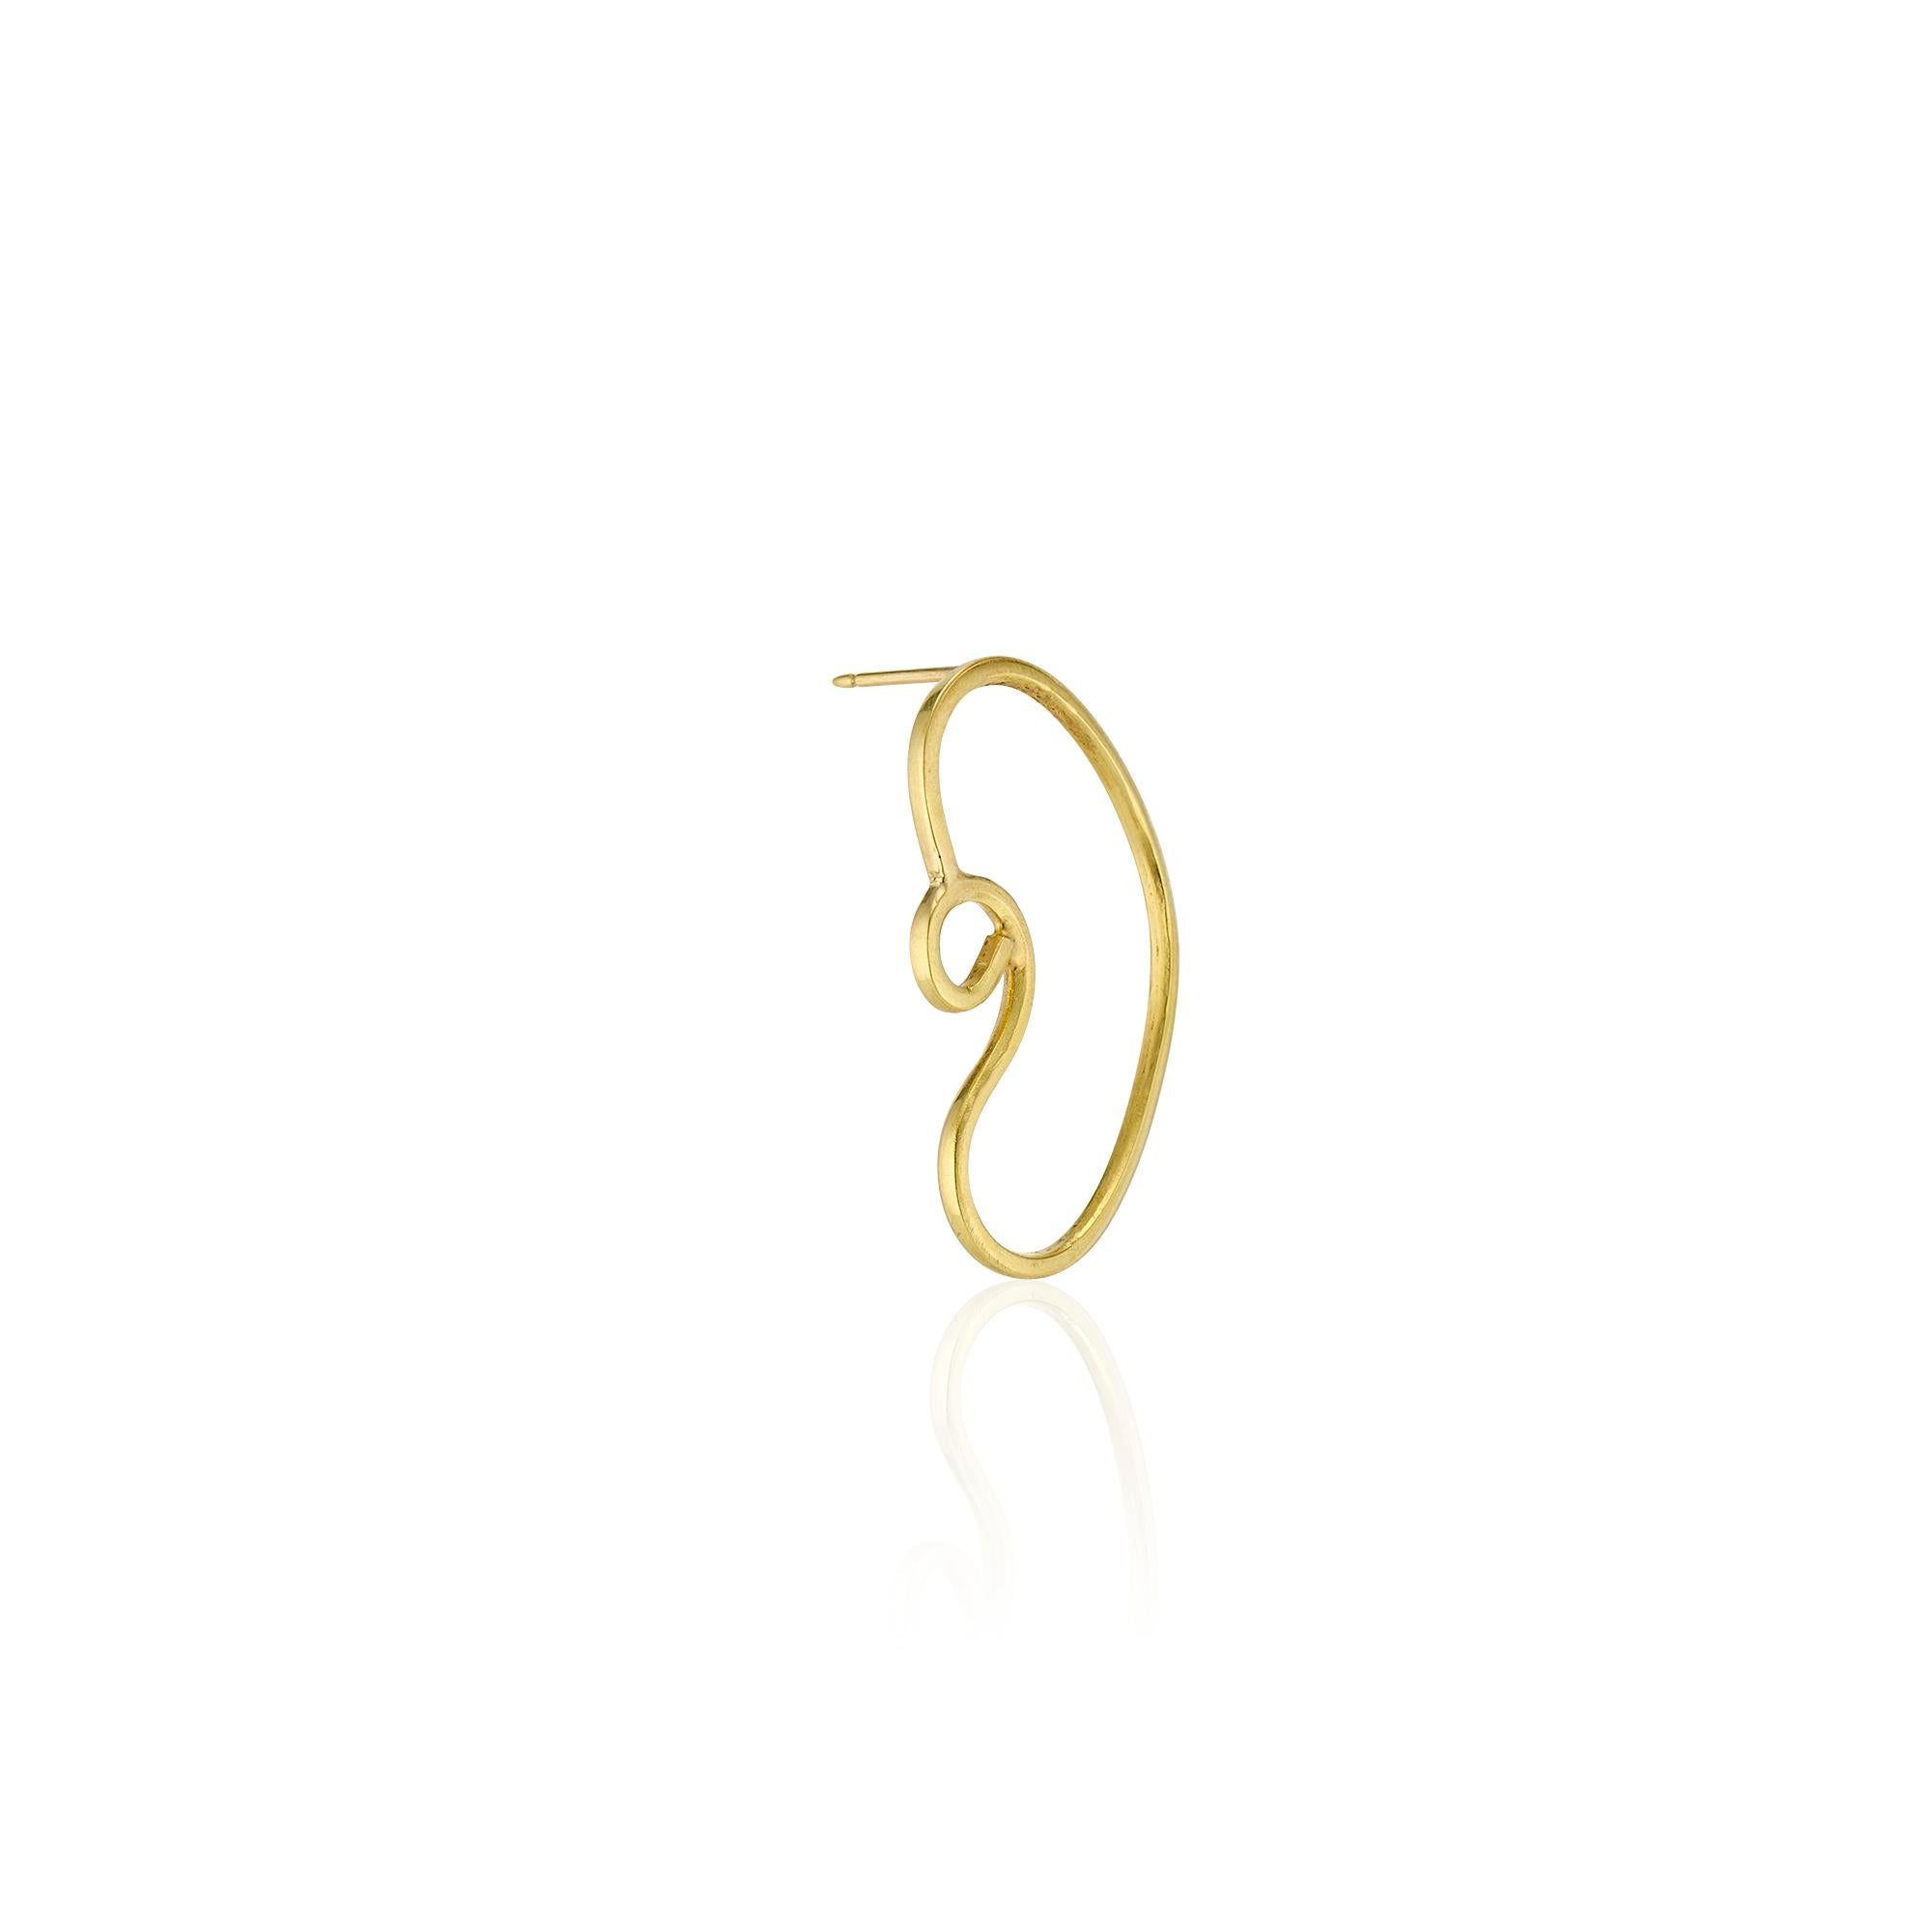 Deborah Meyers Contemporary Single Gold Wire Ear Earring with Gold Post and Back In New Condition For Sale In New York, NY